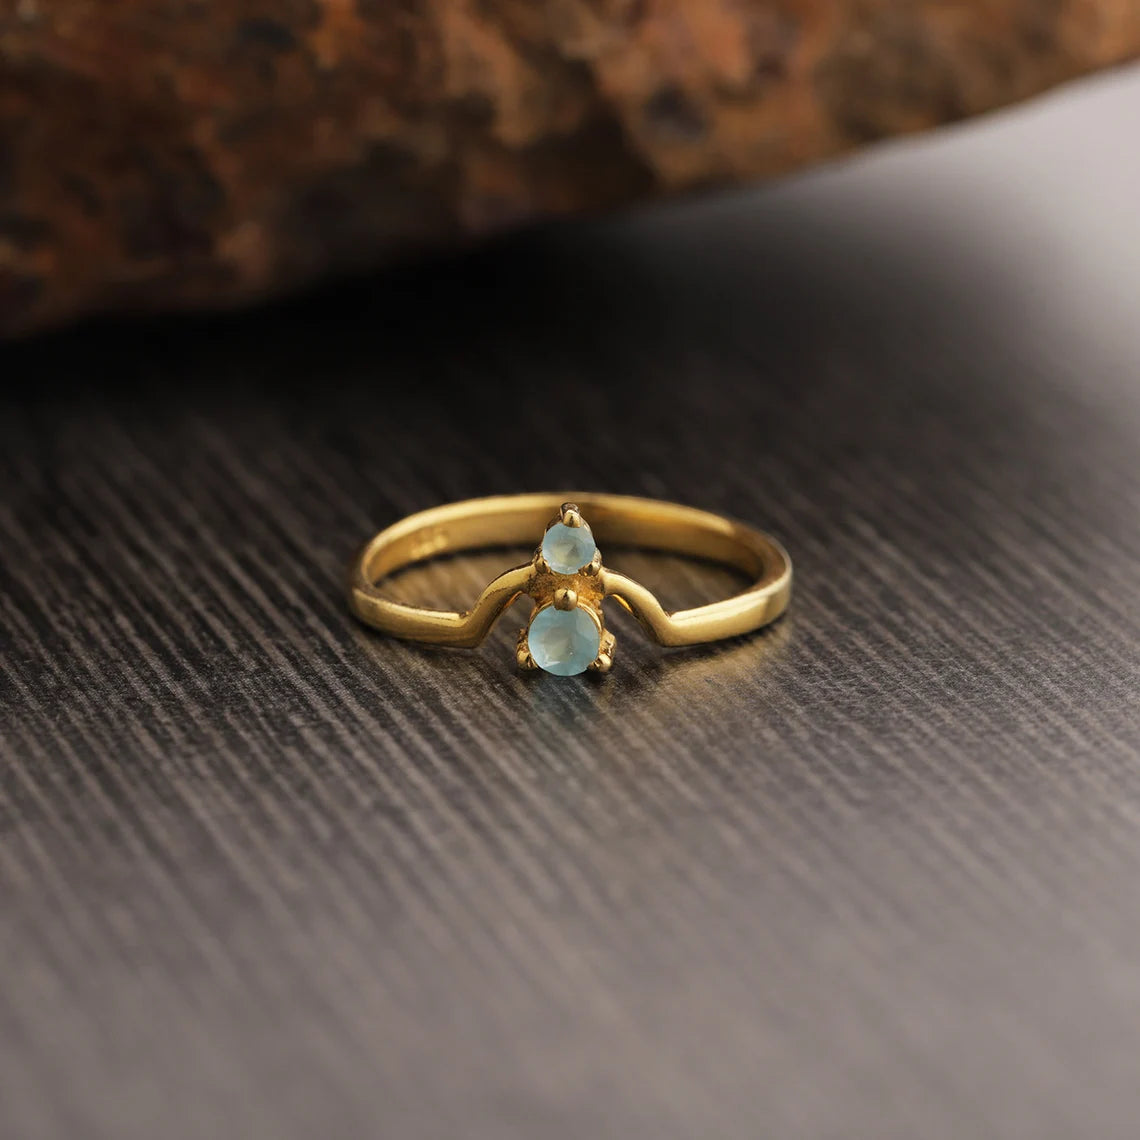 Gold Plated 925 Sterling Silver Ring - Blue Chalcedony Ring - Gemstone Ring - Minimalist Ring - Layering - Stacking Ring